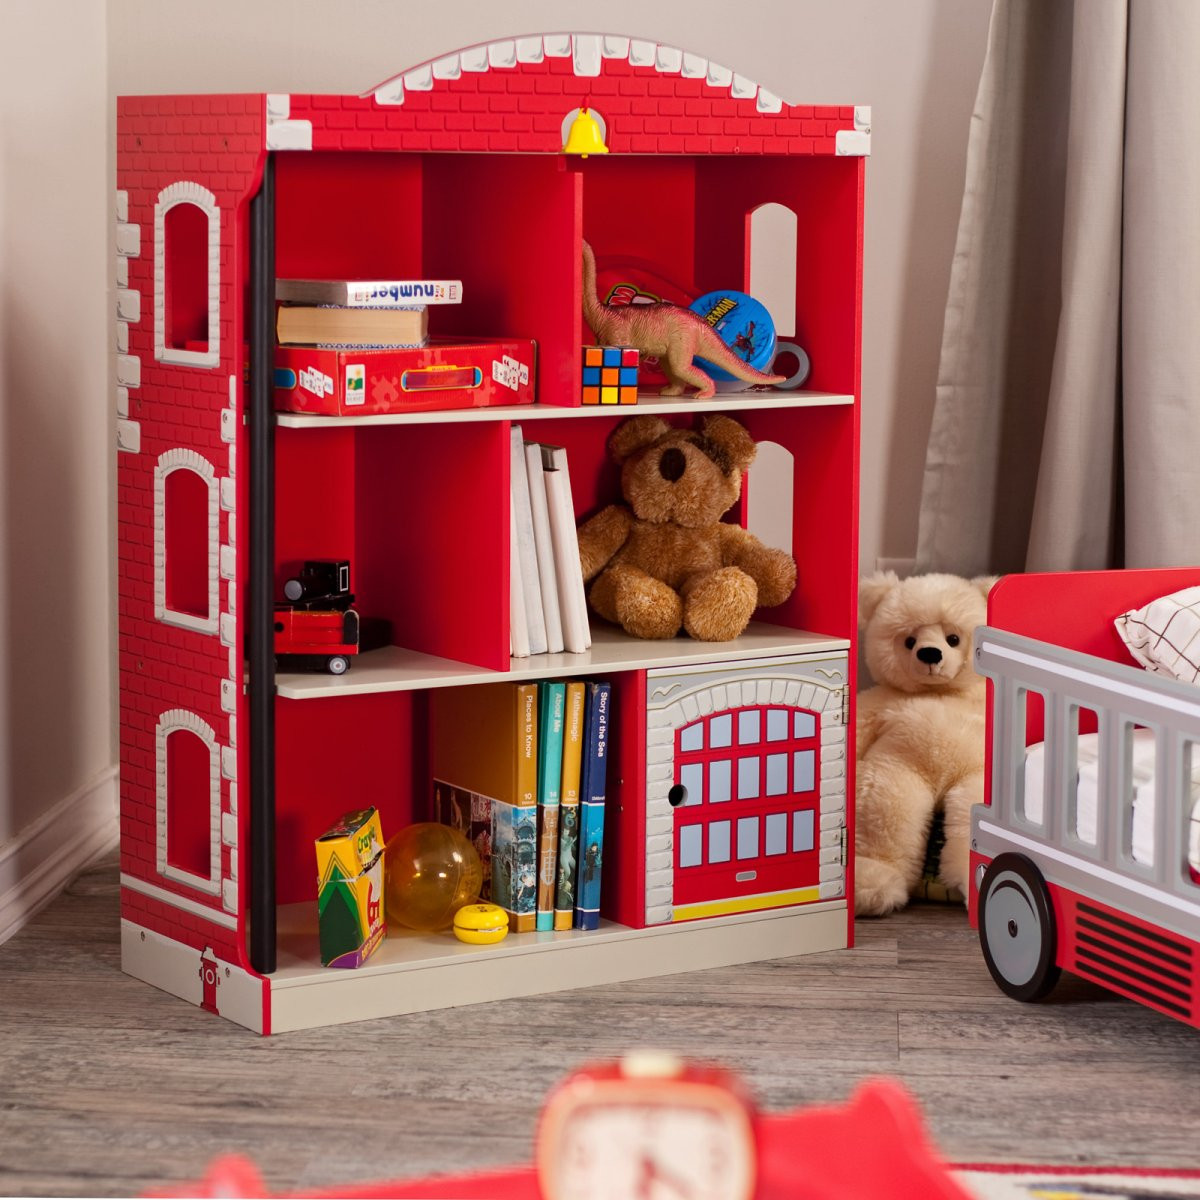 Bookcases For Kids Room
 Adorable Dollhouse Bookshelves for Kids to Decorate the